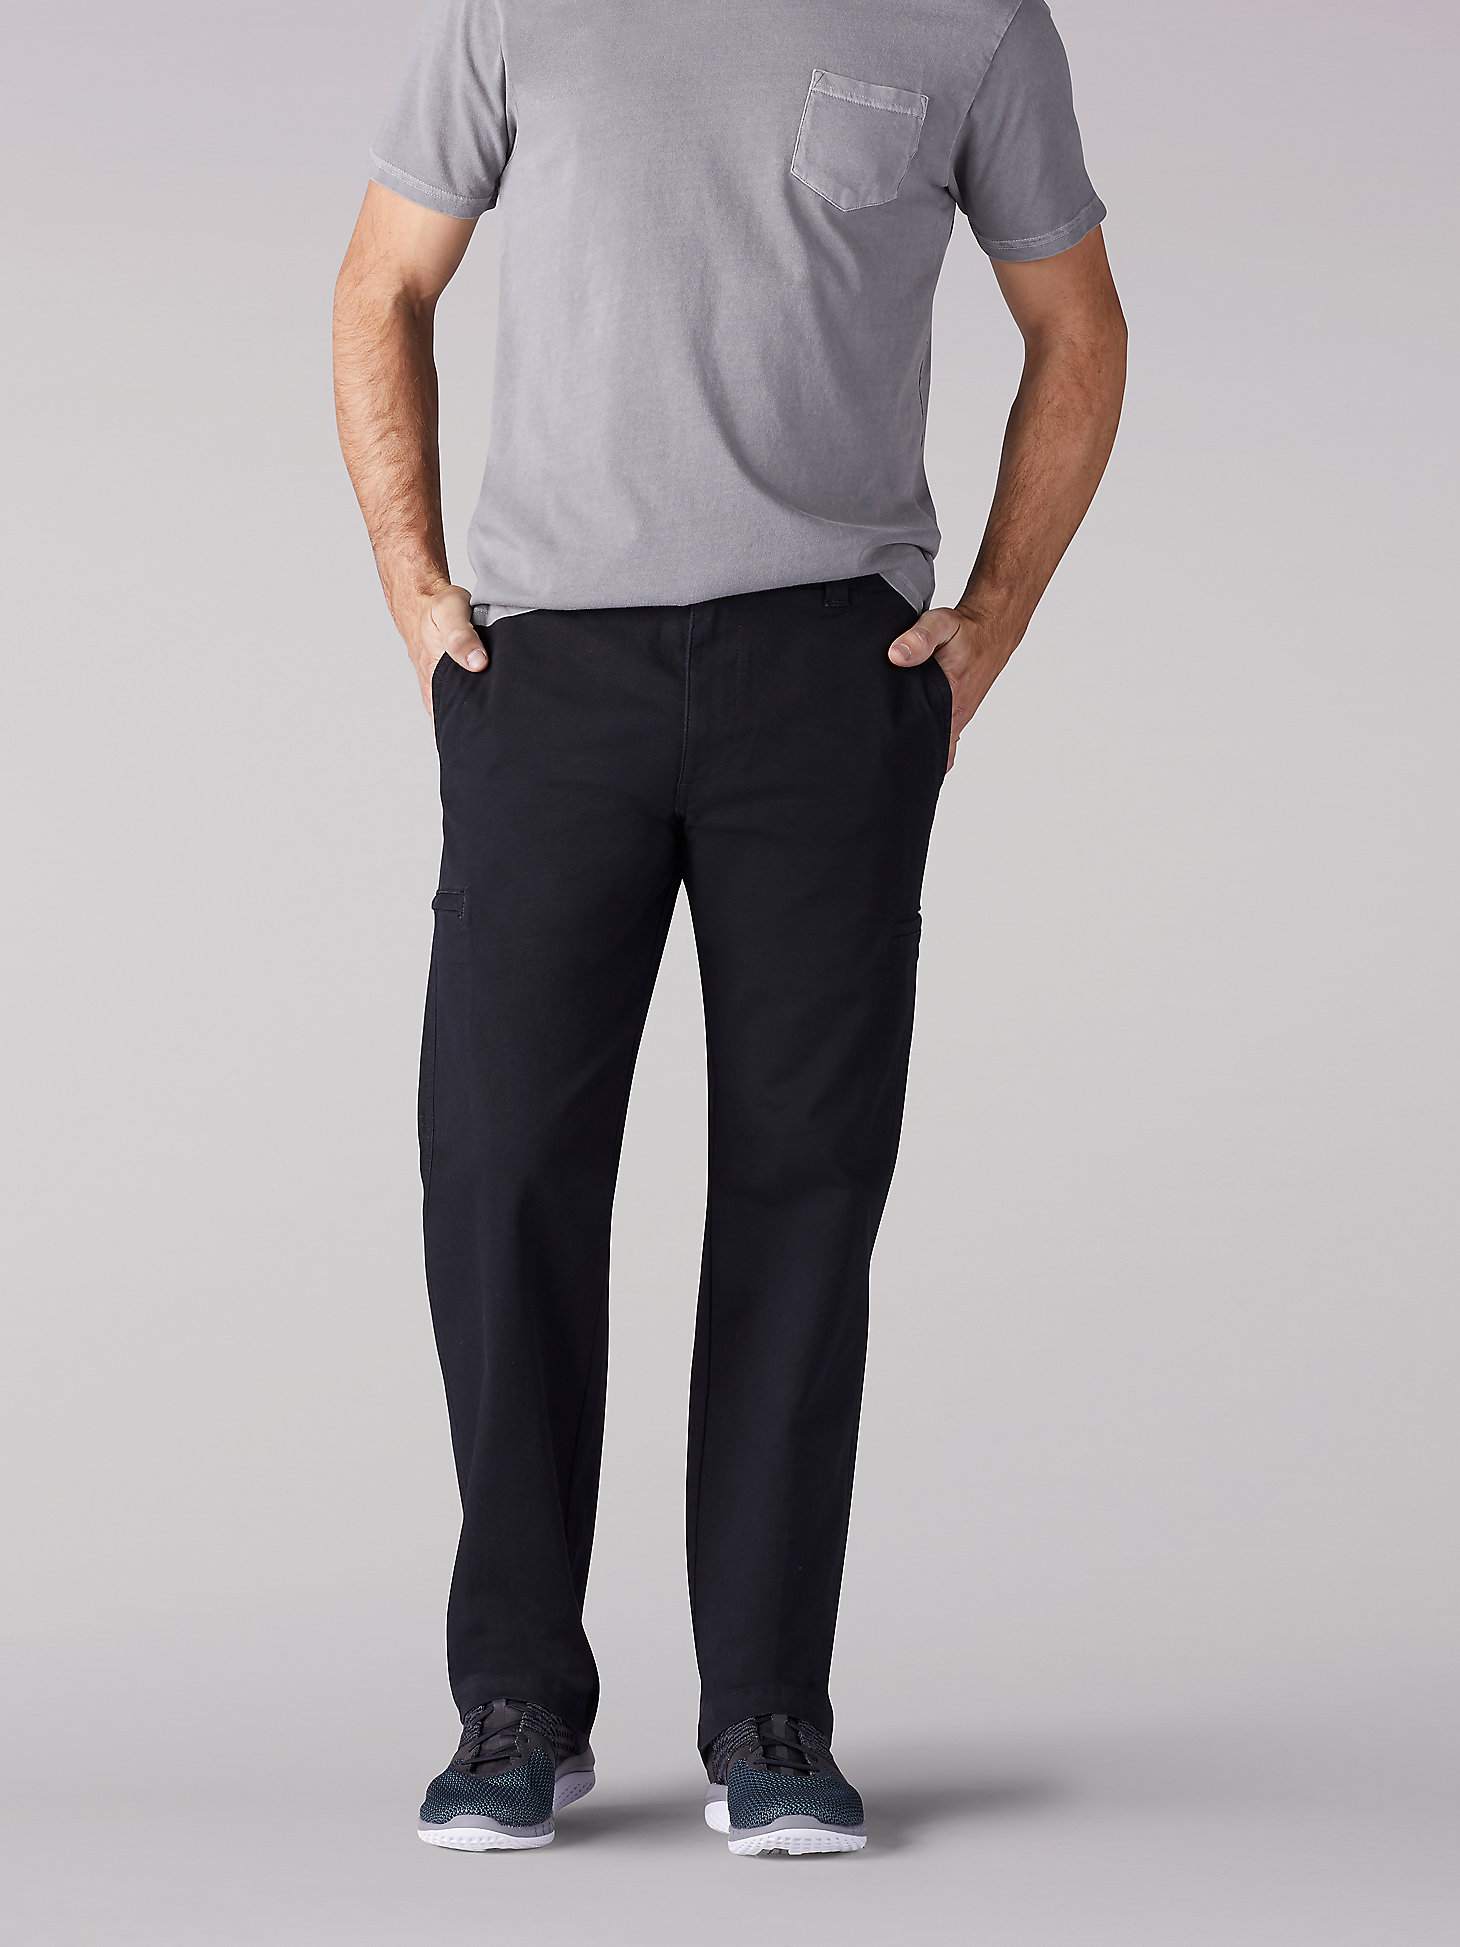 Men’s Extreme Comfort Straight Fit Cargo Pant (Big&Tall) in Black main view